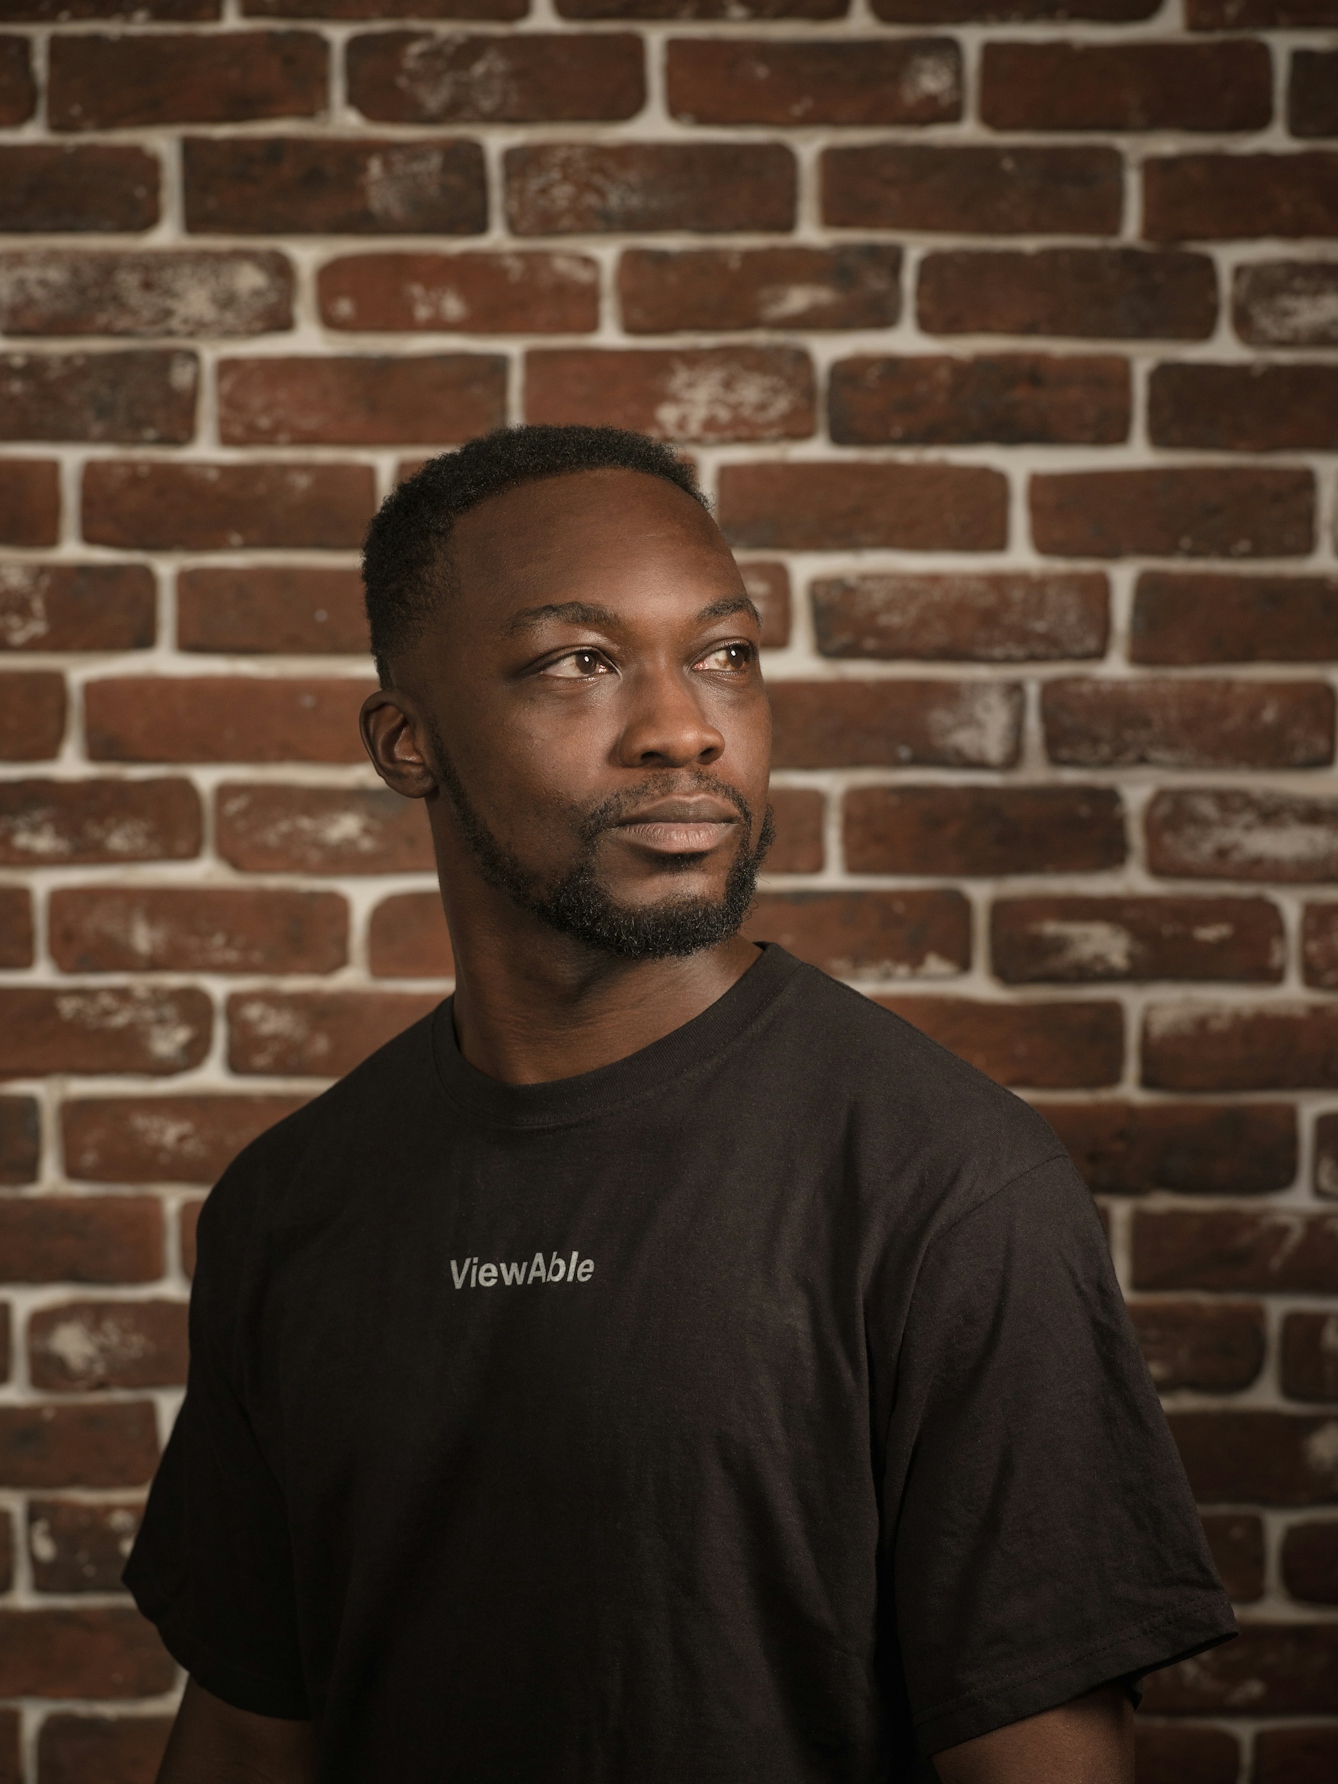 Photographic portrait of a man in a black T-shirt with the word 'Viewable'.  The man is facing to the right of the frame, and gazing into the middle distance.